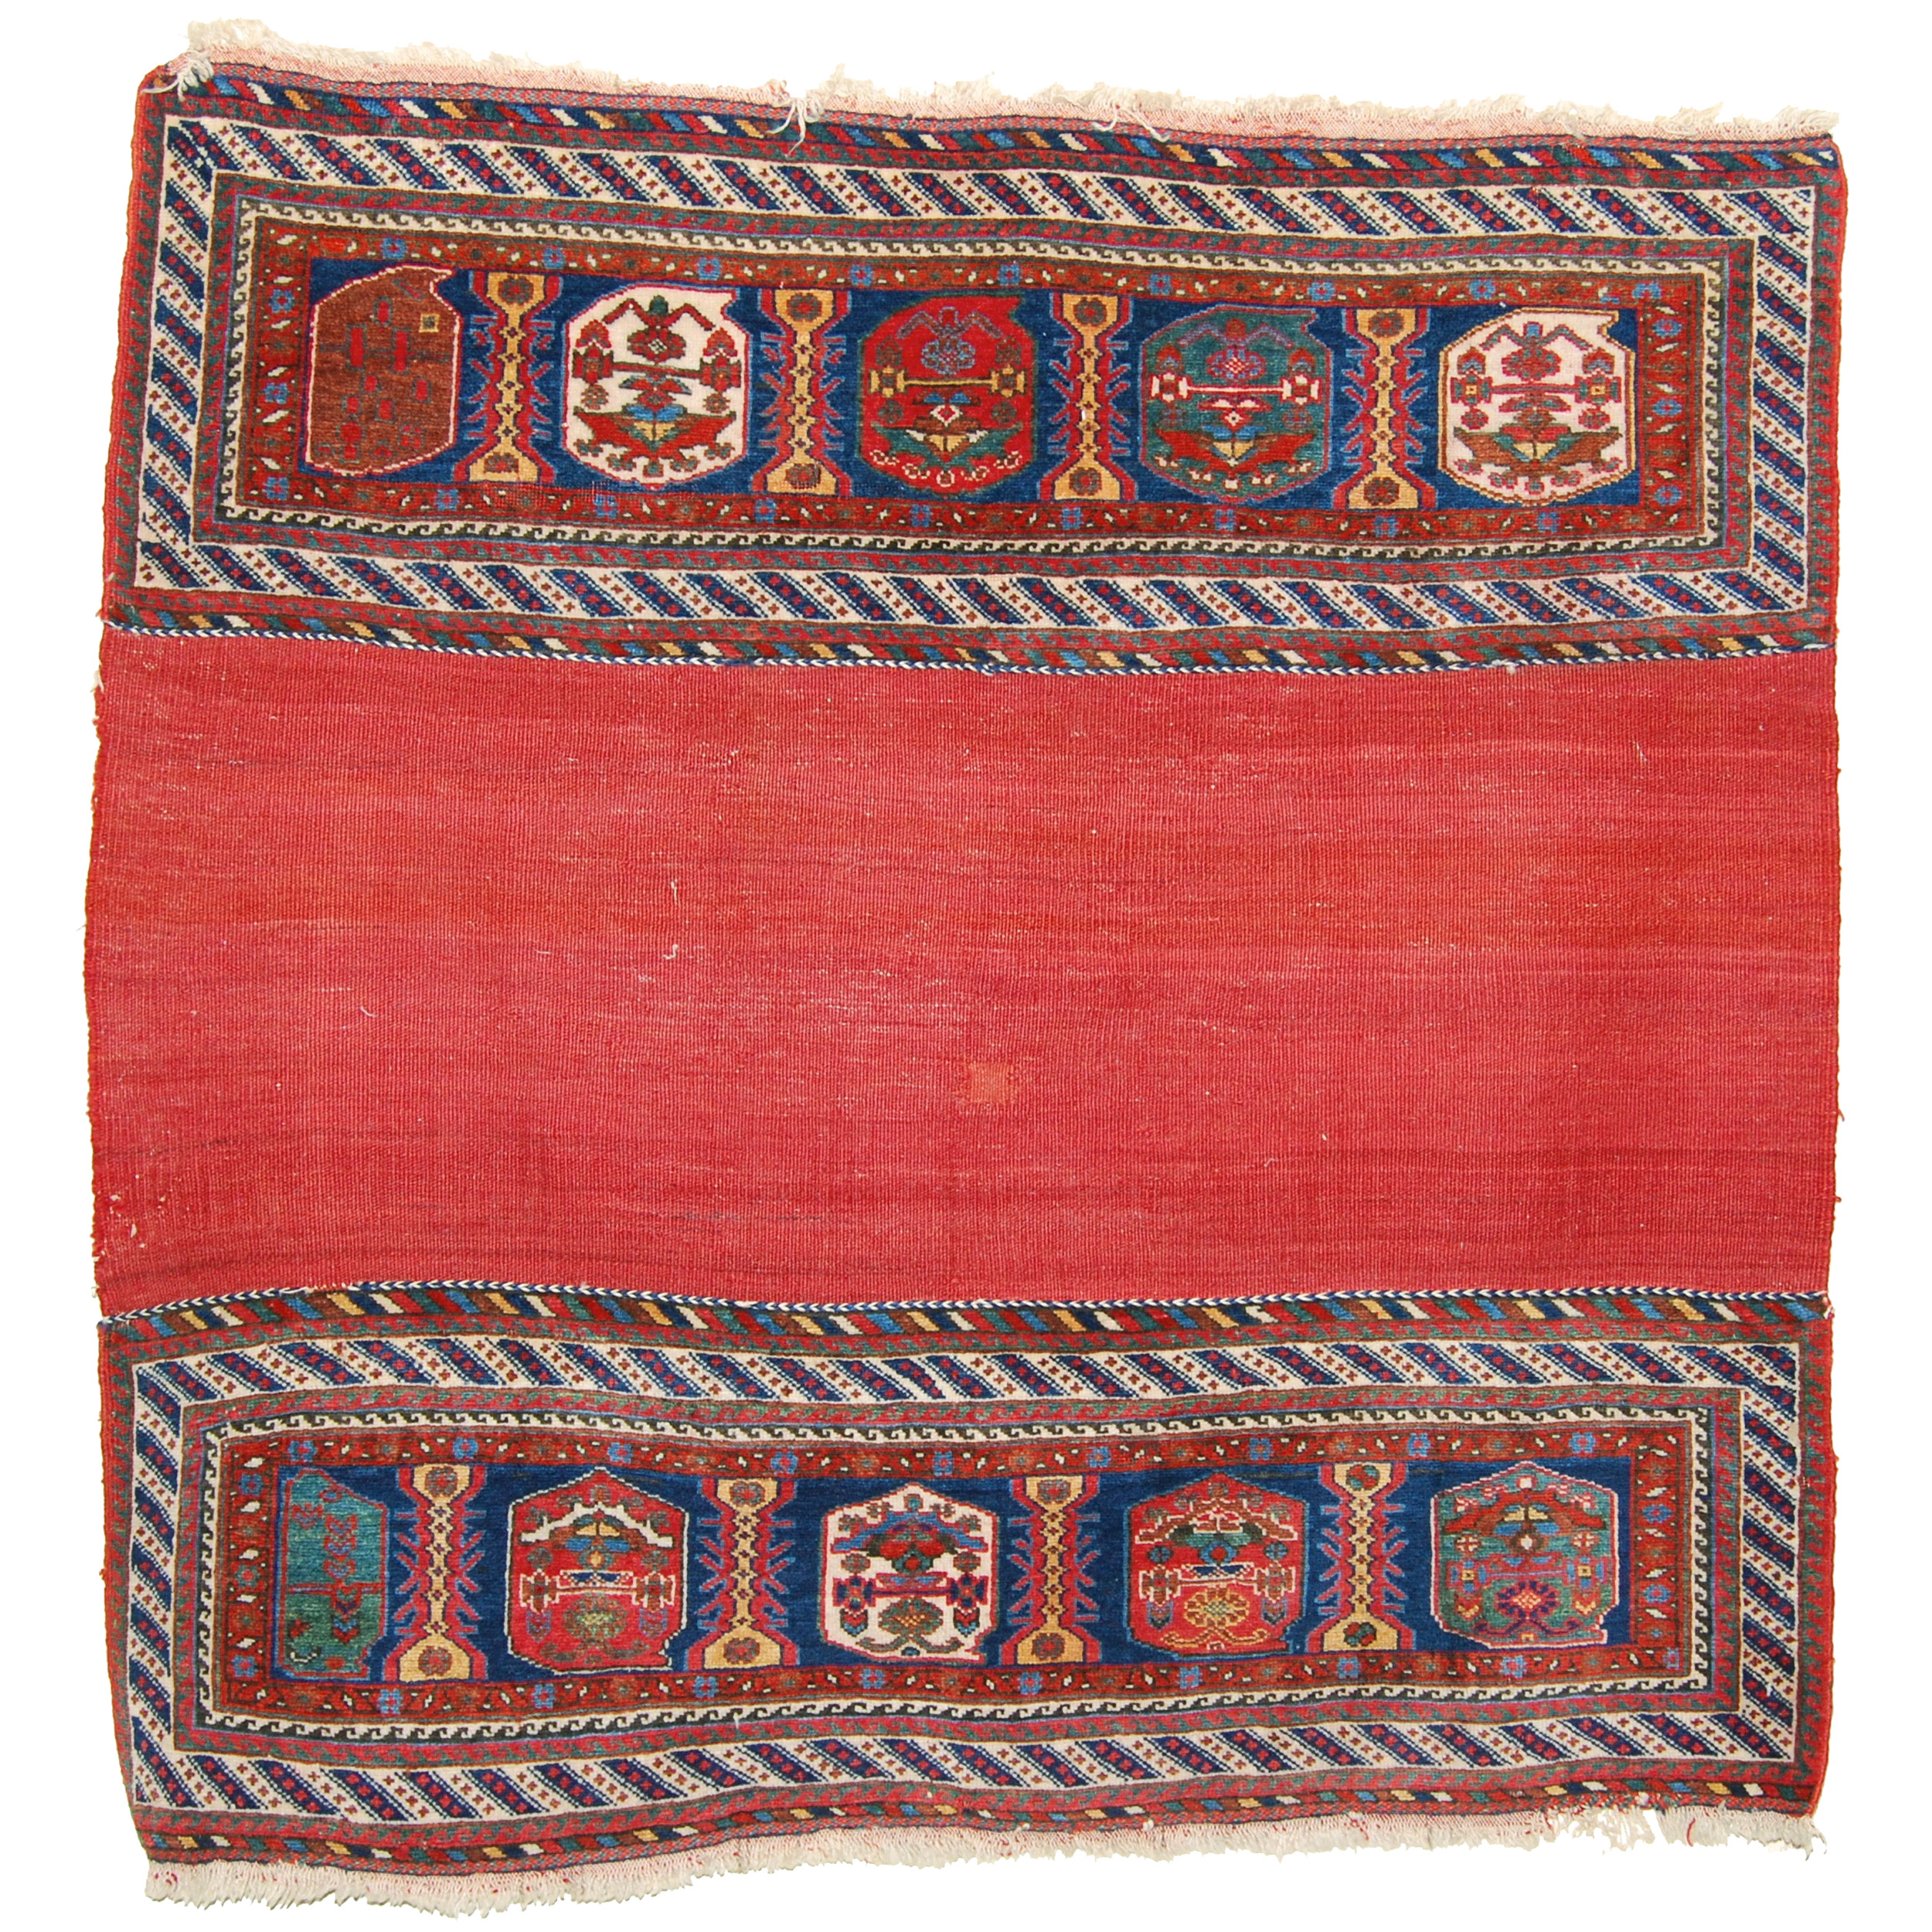 Antique Afshar tribal pair of bag faces, possibly from a "Mafrash" (cargo bag or bedding bag), south Persia, circa 1895, Douglas Stock Gallery, antique Oriental rugs Boston, antique tribal rugs, antique Persian bags and bag faces, collectable antique rugs, antique rugs New England, antique Oriental rugs Massachusetts